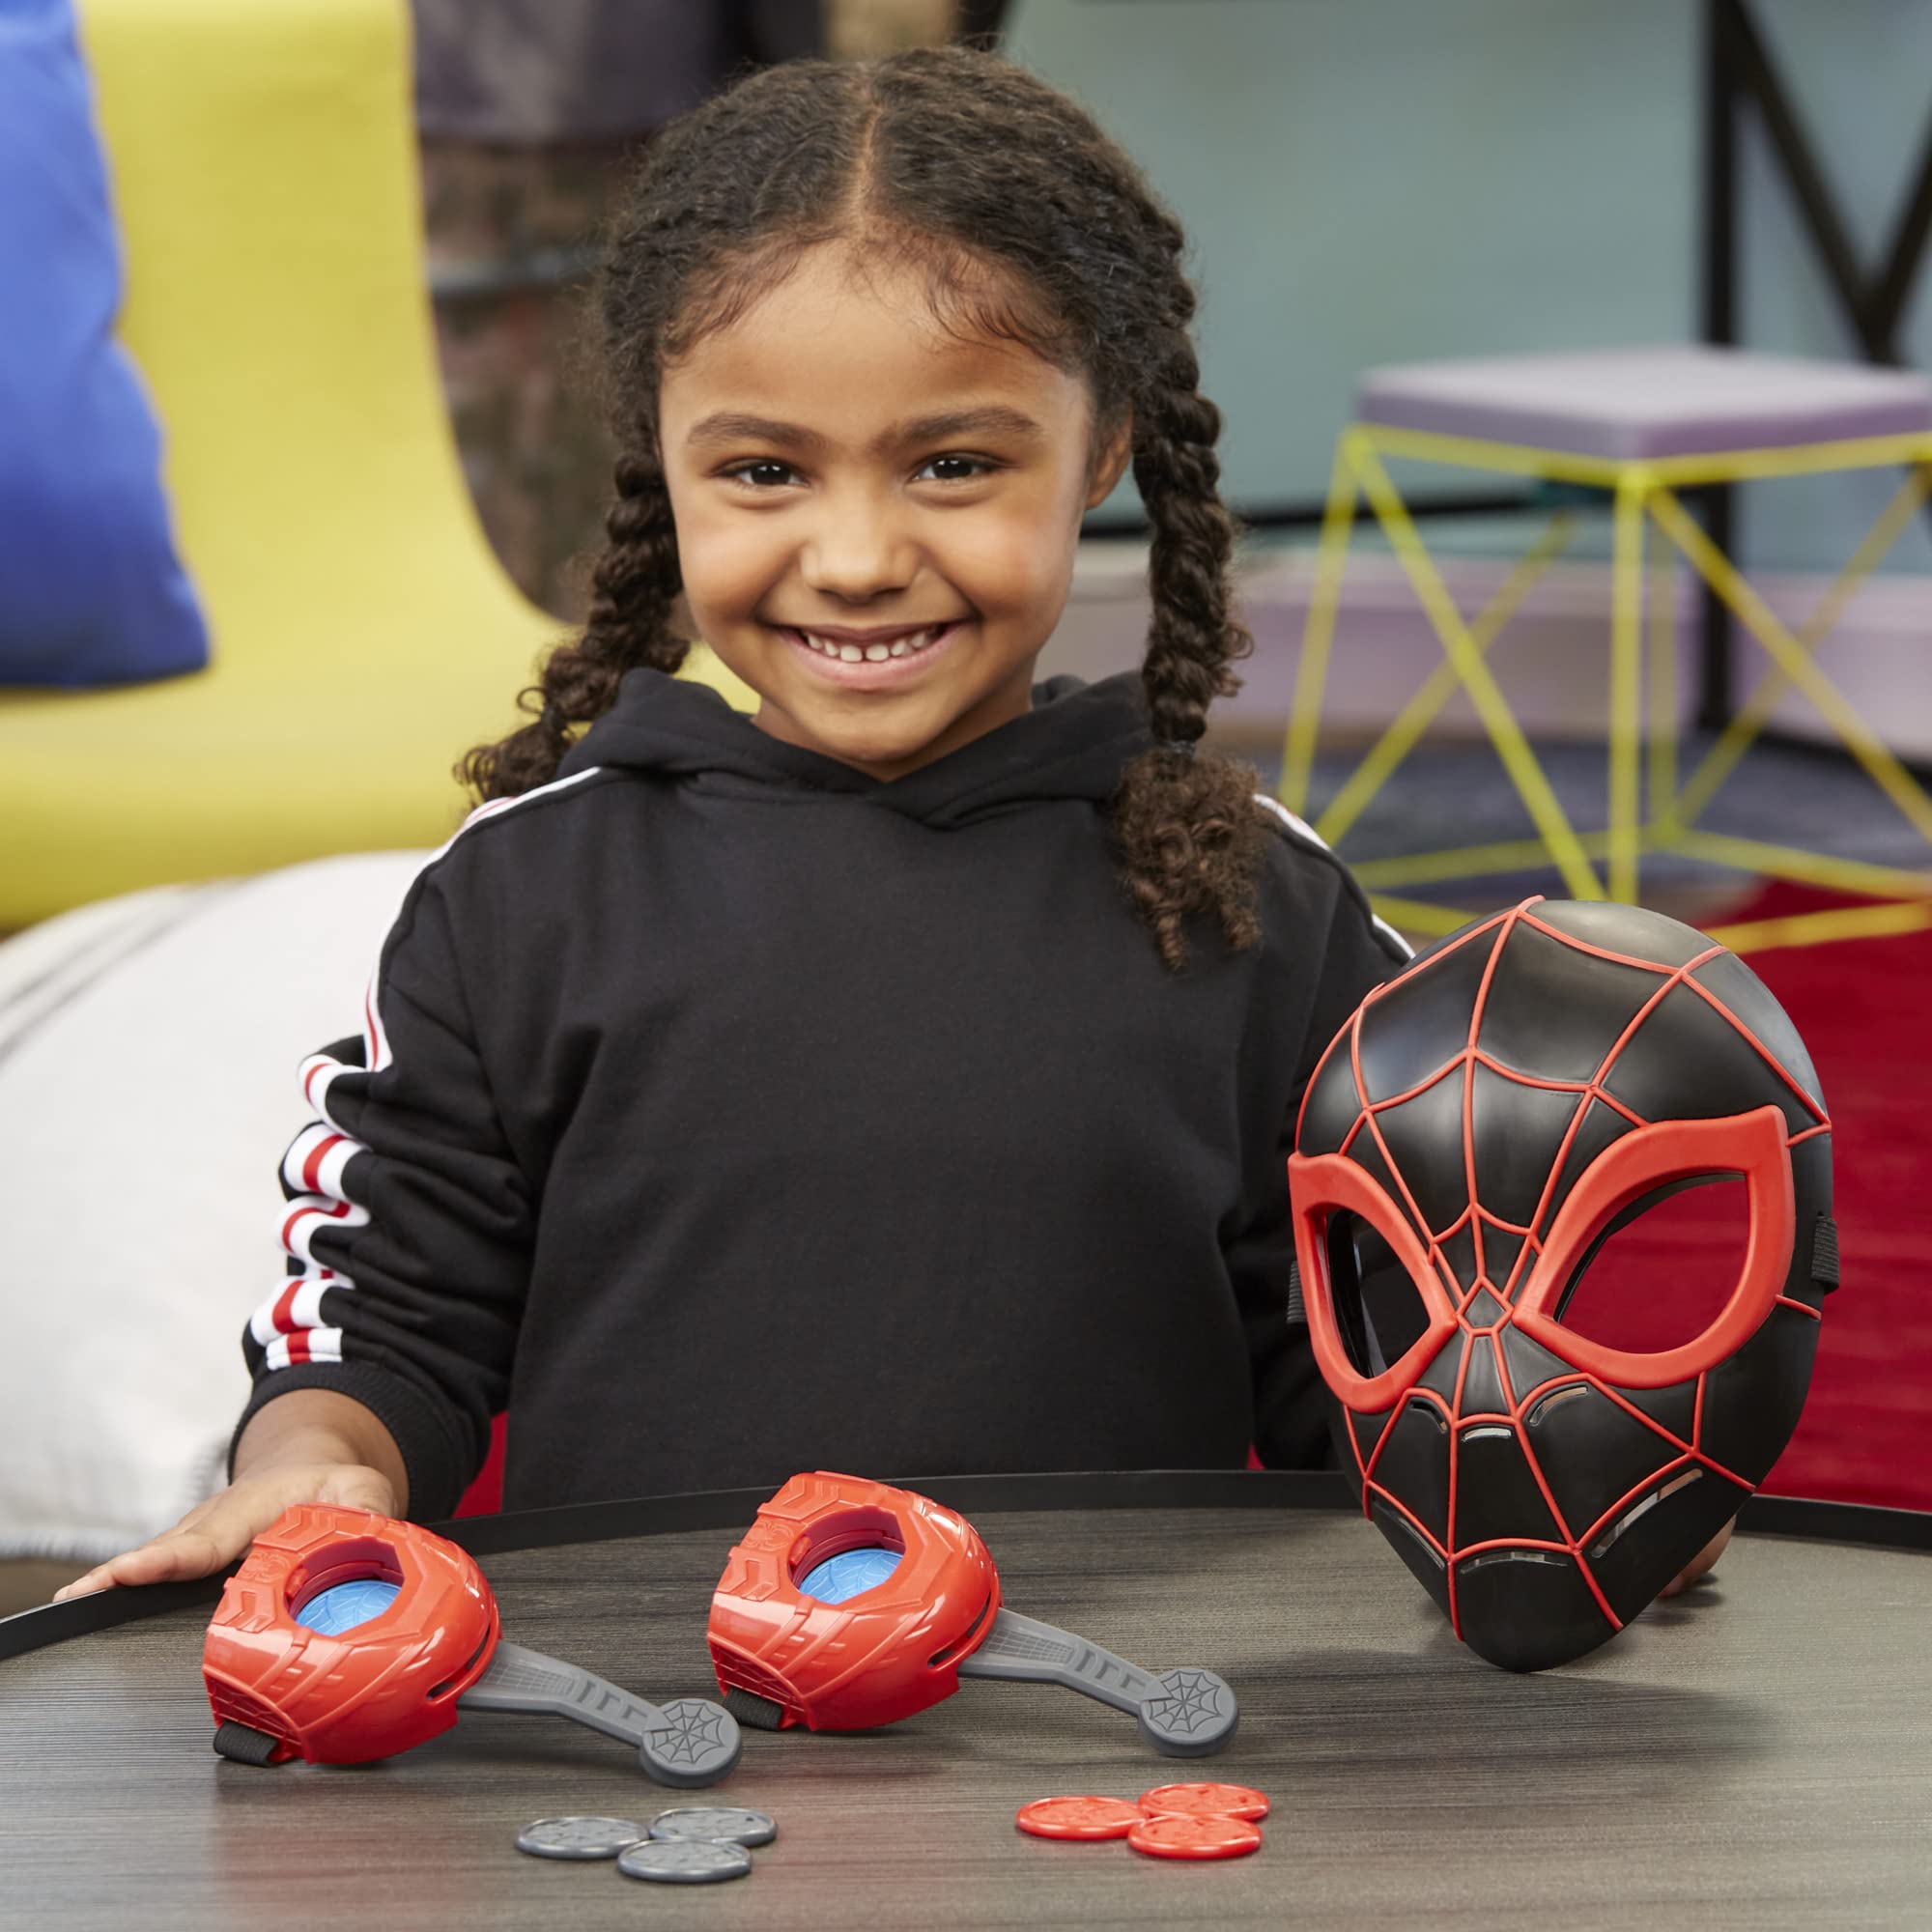 Spider-Man Marvel Across The Spider-Verse Web Action Gear, Miles Morales Costume Mask and Gauntlets, Super Hero Toys for 5 Year Old Boys and Girls and Up